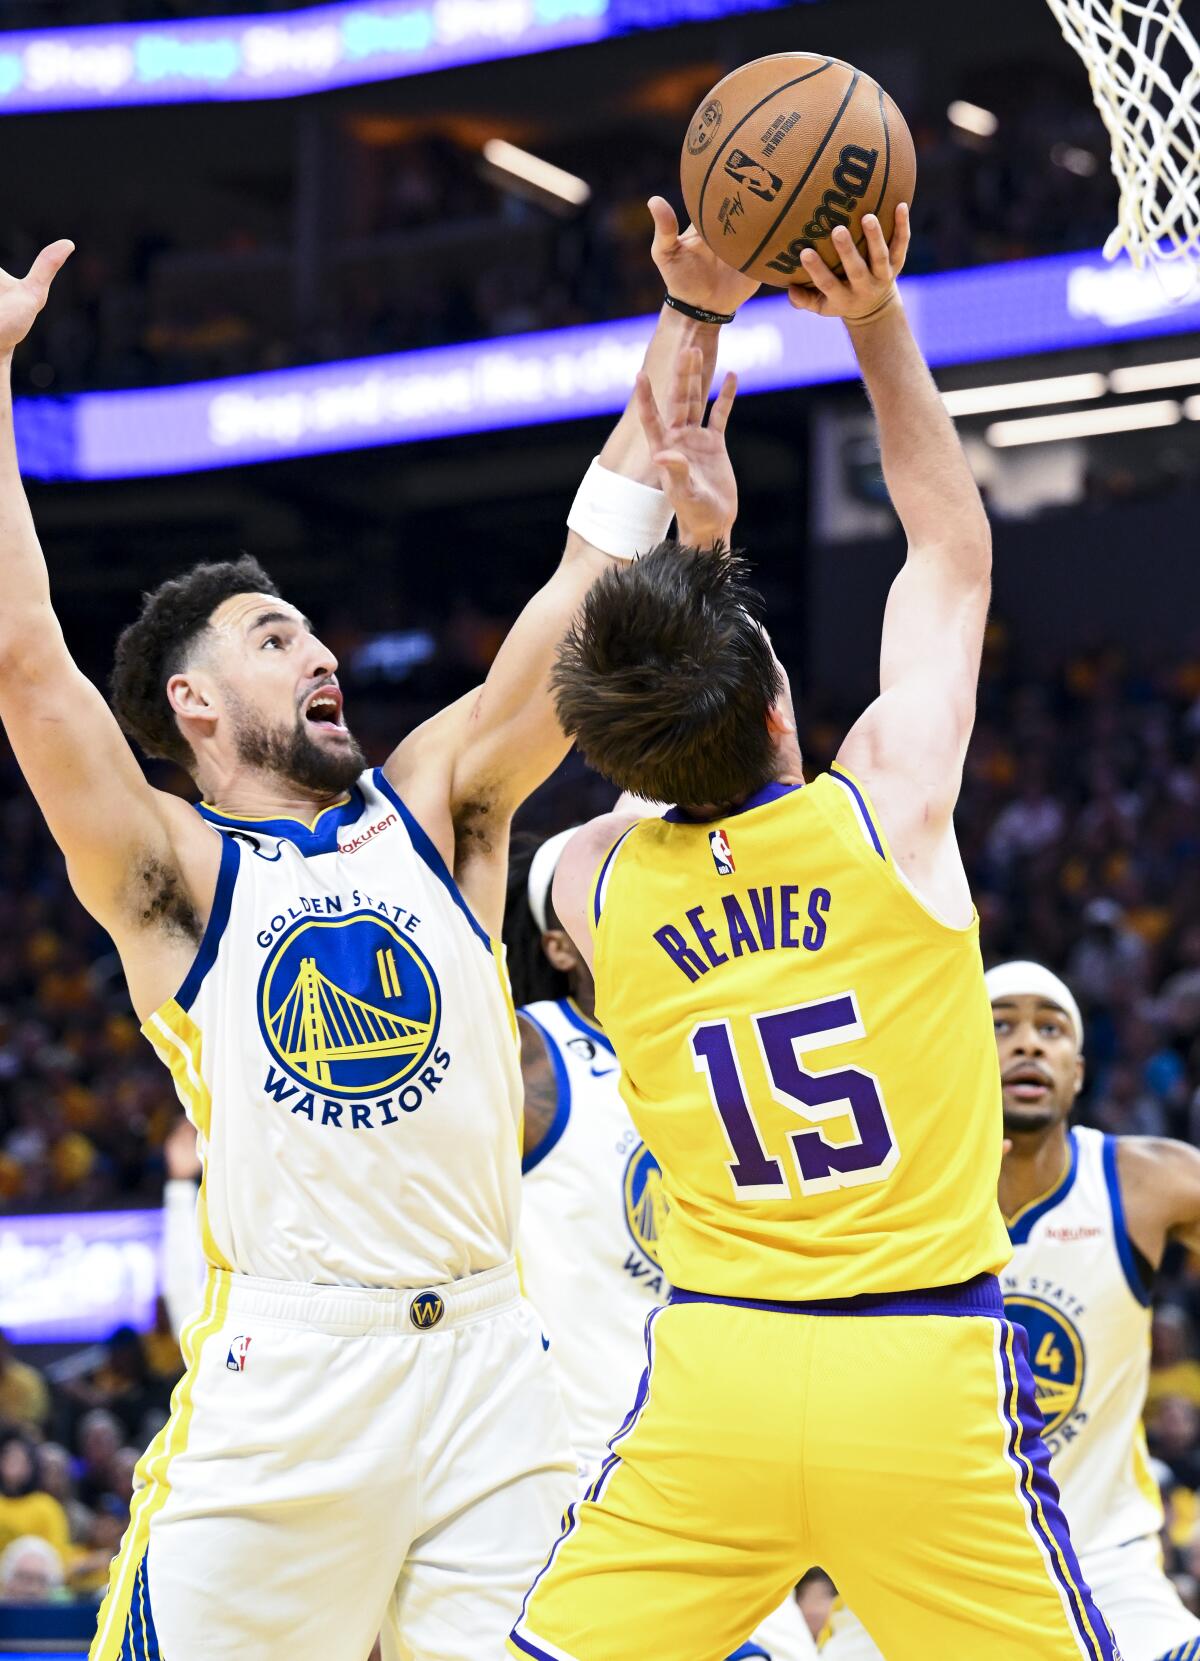 Lakers guard Austin Reaves tries to loft a shot over Warriors guard Klay Thompson during Game 5.